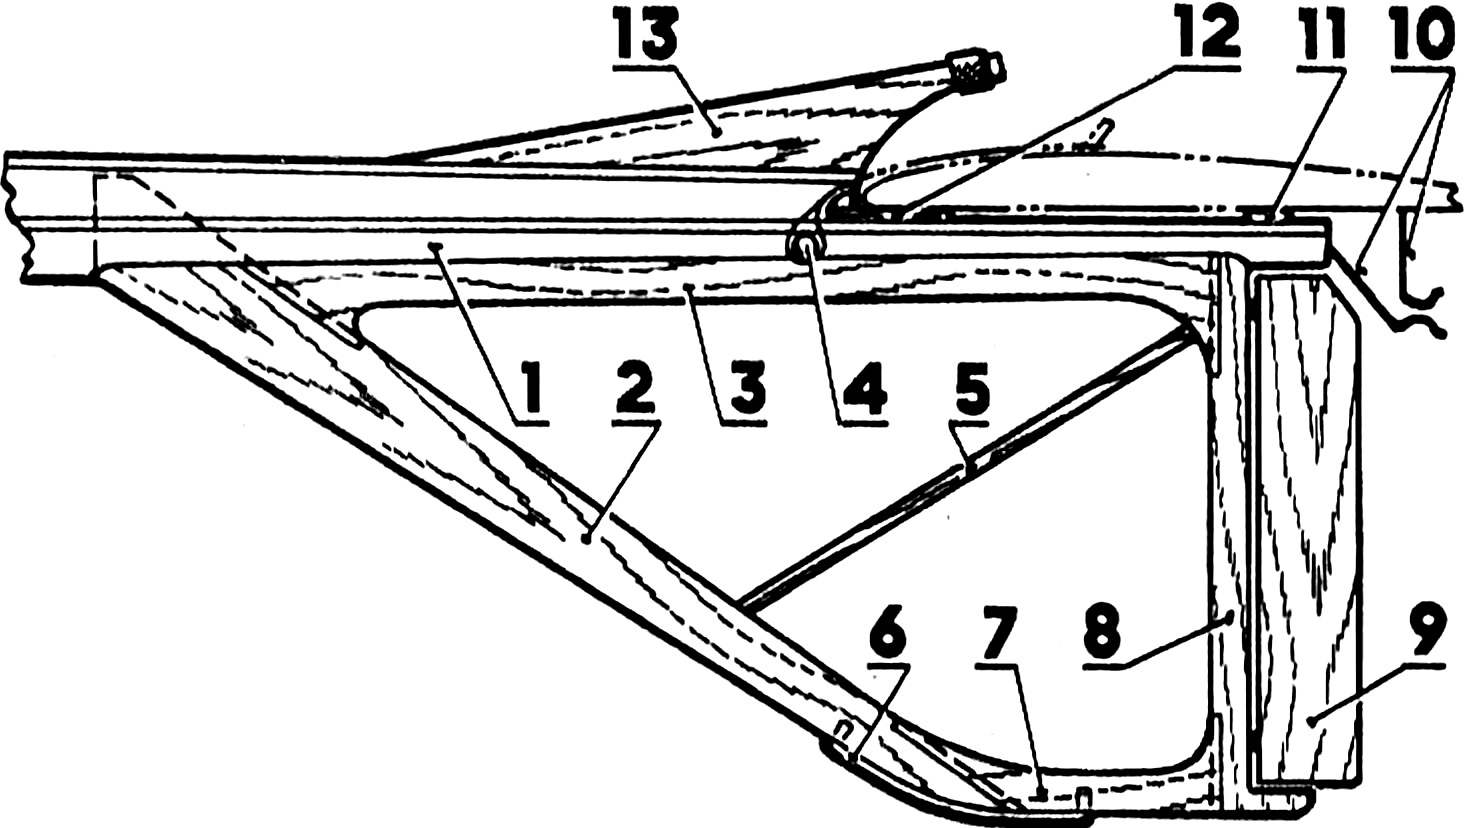 Fig. 6. The tail part of the fuselage.